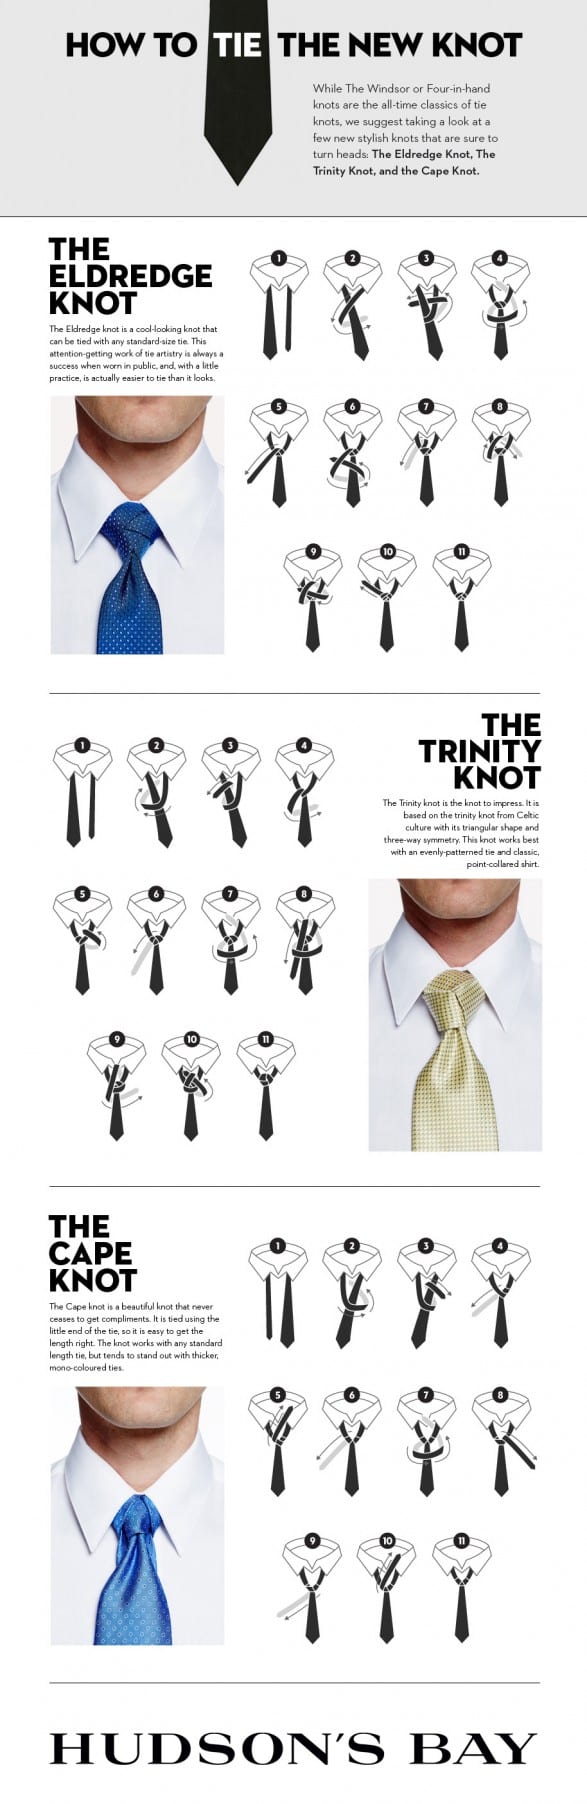 Step By Step Method to Tying a Tie - Infographic | Side By Side Reviews